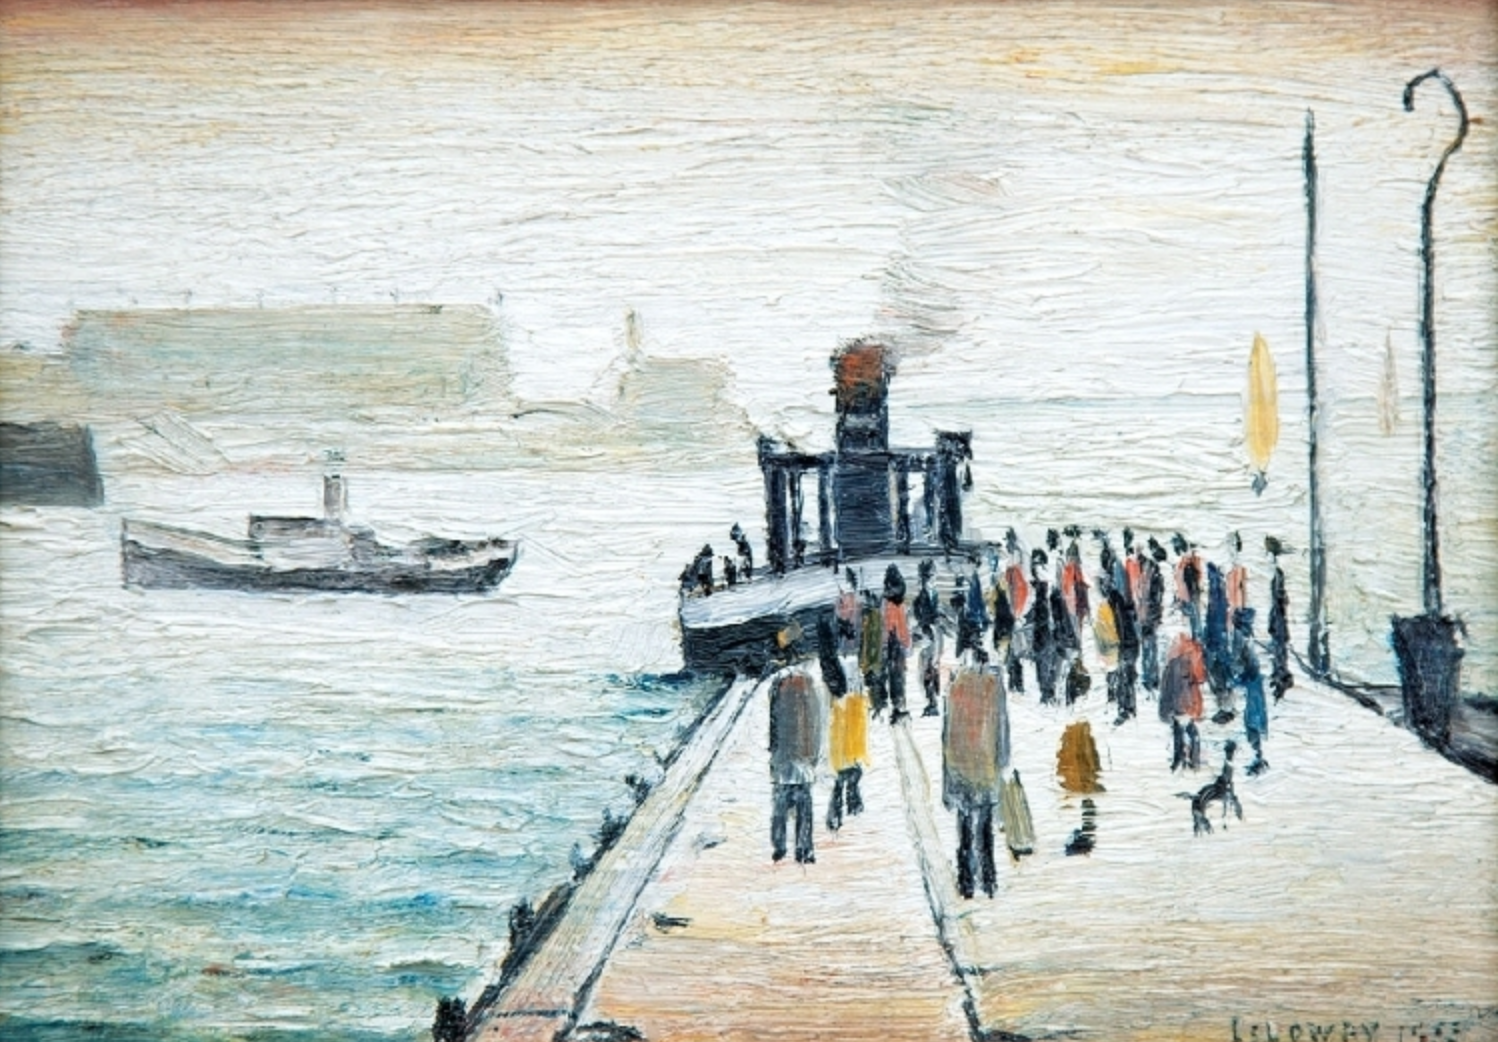 The Ferry Boat at Knott End (1952) by Laurence Stephen Lowry (1887 - 1976), English artist.